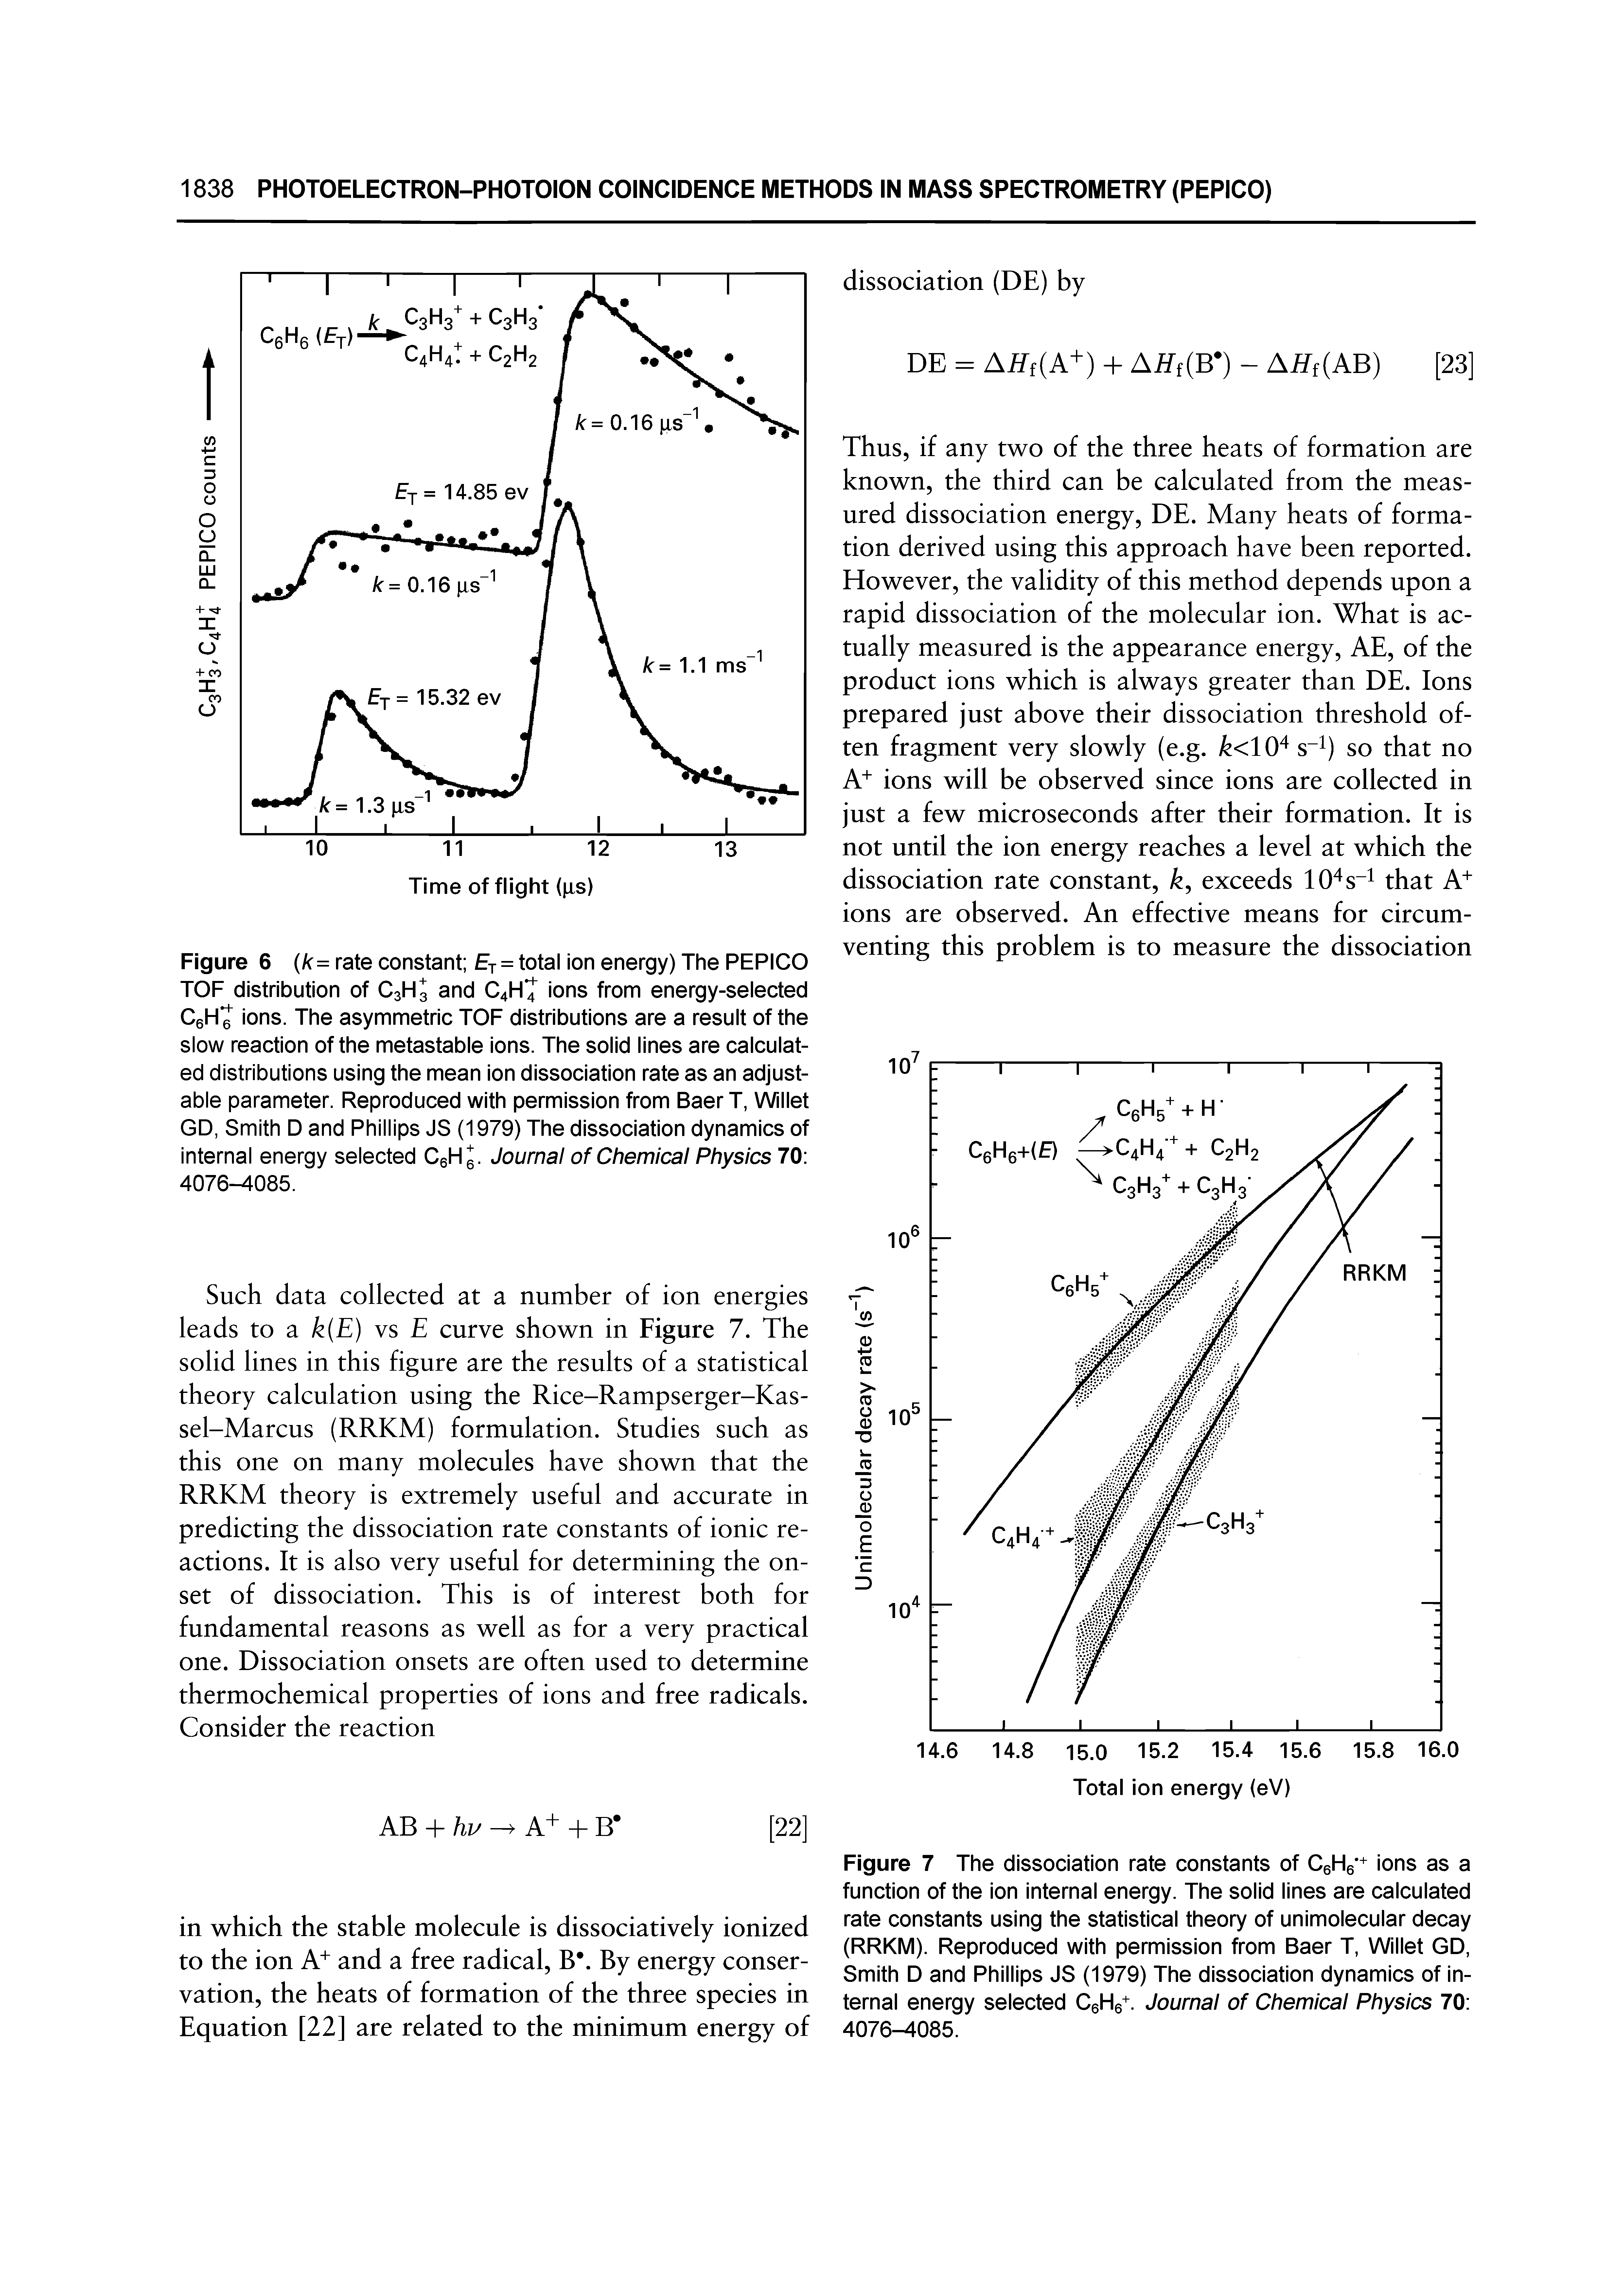 Figure 7 The dissociation rate constants of C6H6 + ions as a function of the ion internal energy. The solid lines are calculated rate constants using the statistical theory of unimolecular decay (RRKM). Reproduced with permission from Baer T, Willet GD, Smith D and Phillips JS (1979) The dissociation dynamics of internal energy selected CeHe. Journal of Chemical Physics 70 4076 085.